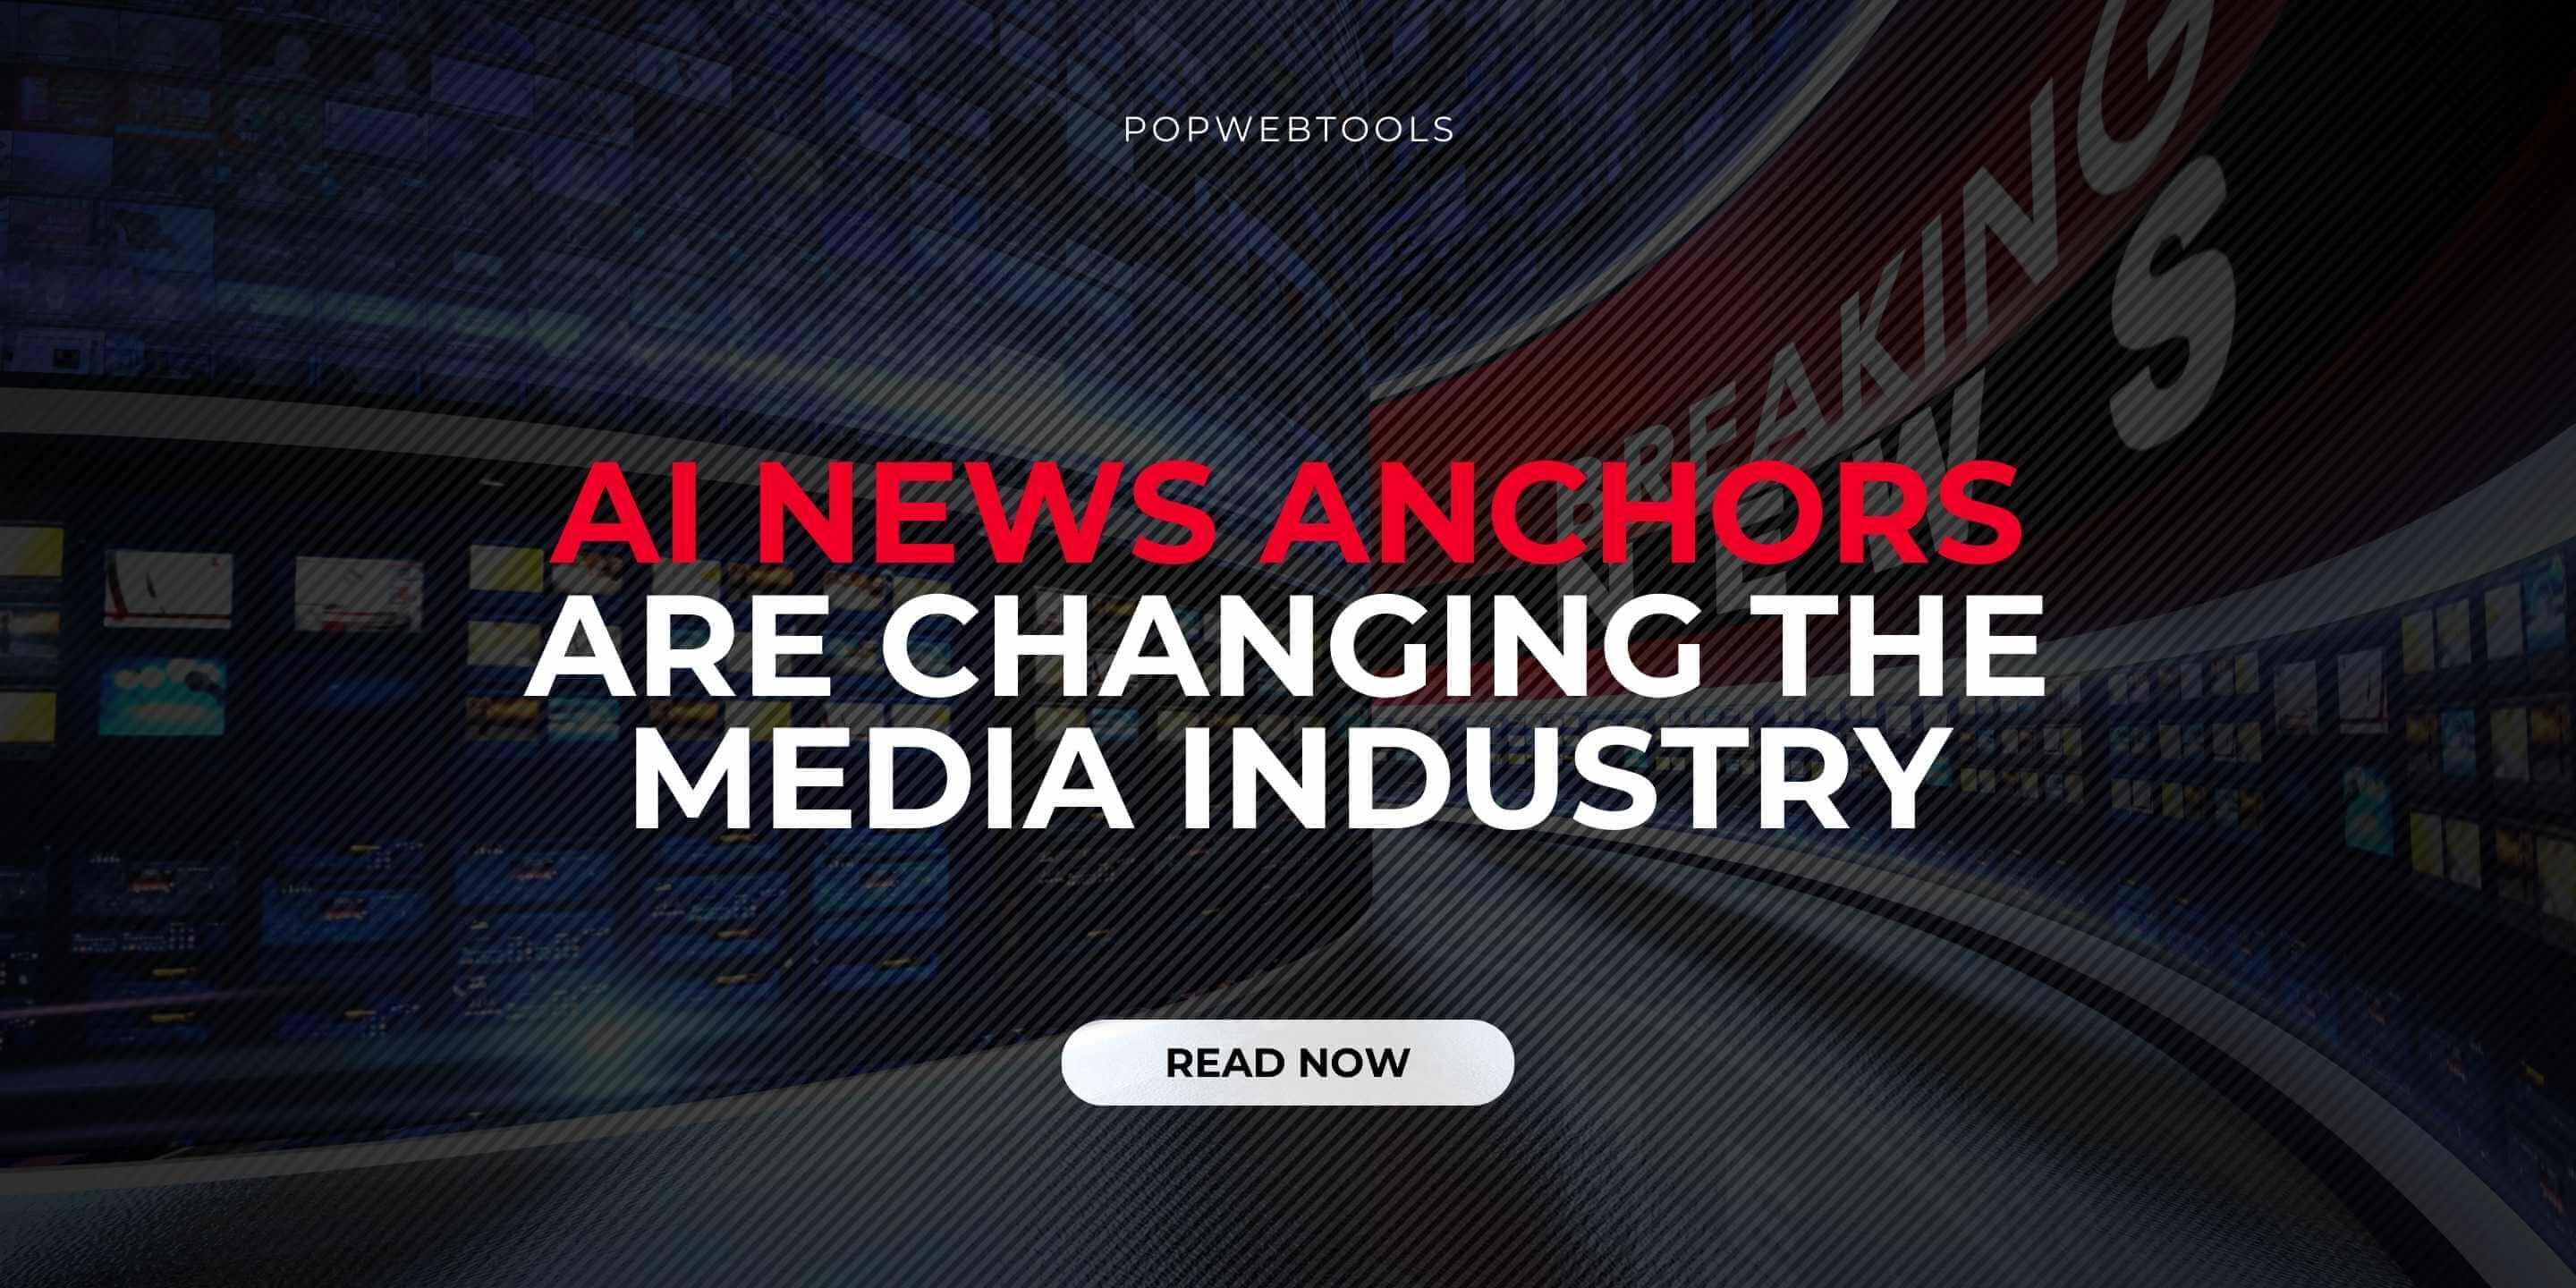 AI News Anchors Are Changing the Media Industry